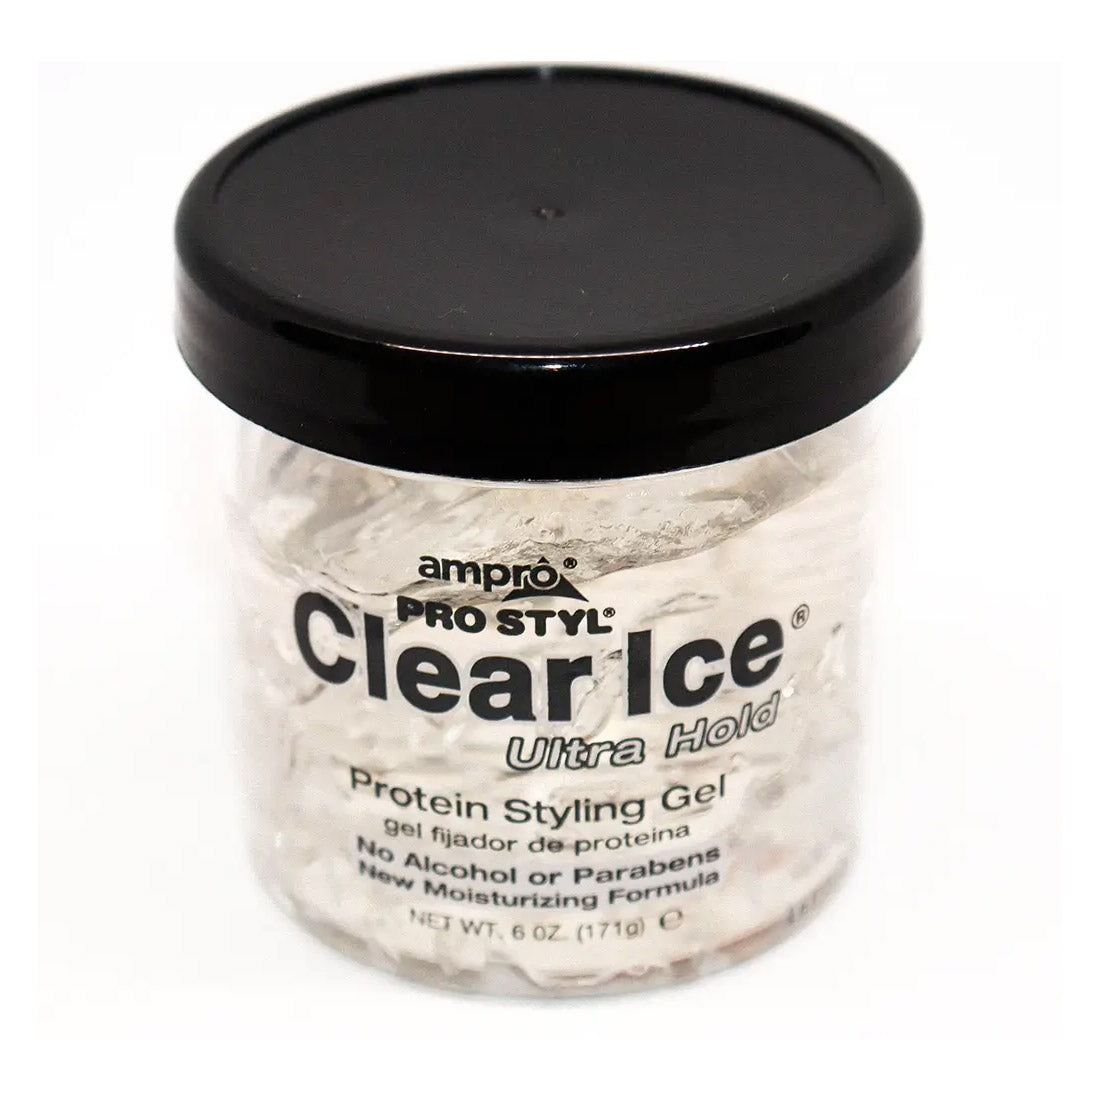 Ampro Pro Style Clear Ice Ultra Hold Protein Styling Gel